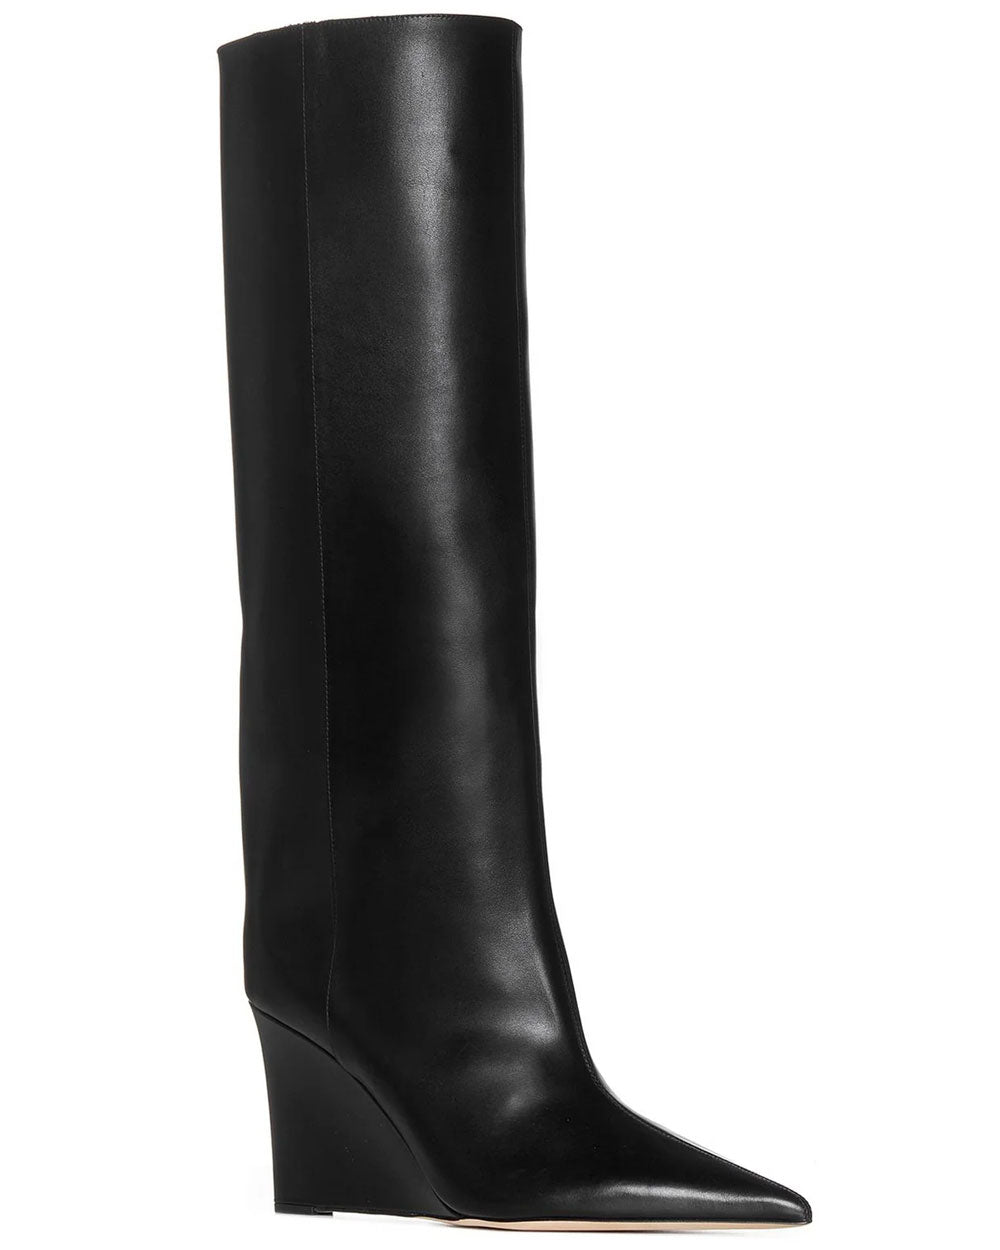 Blake Leather Boot in Black